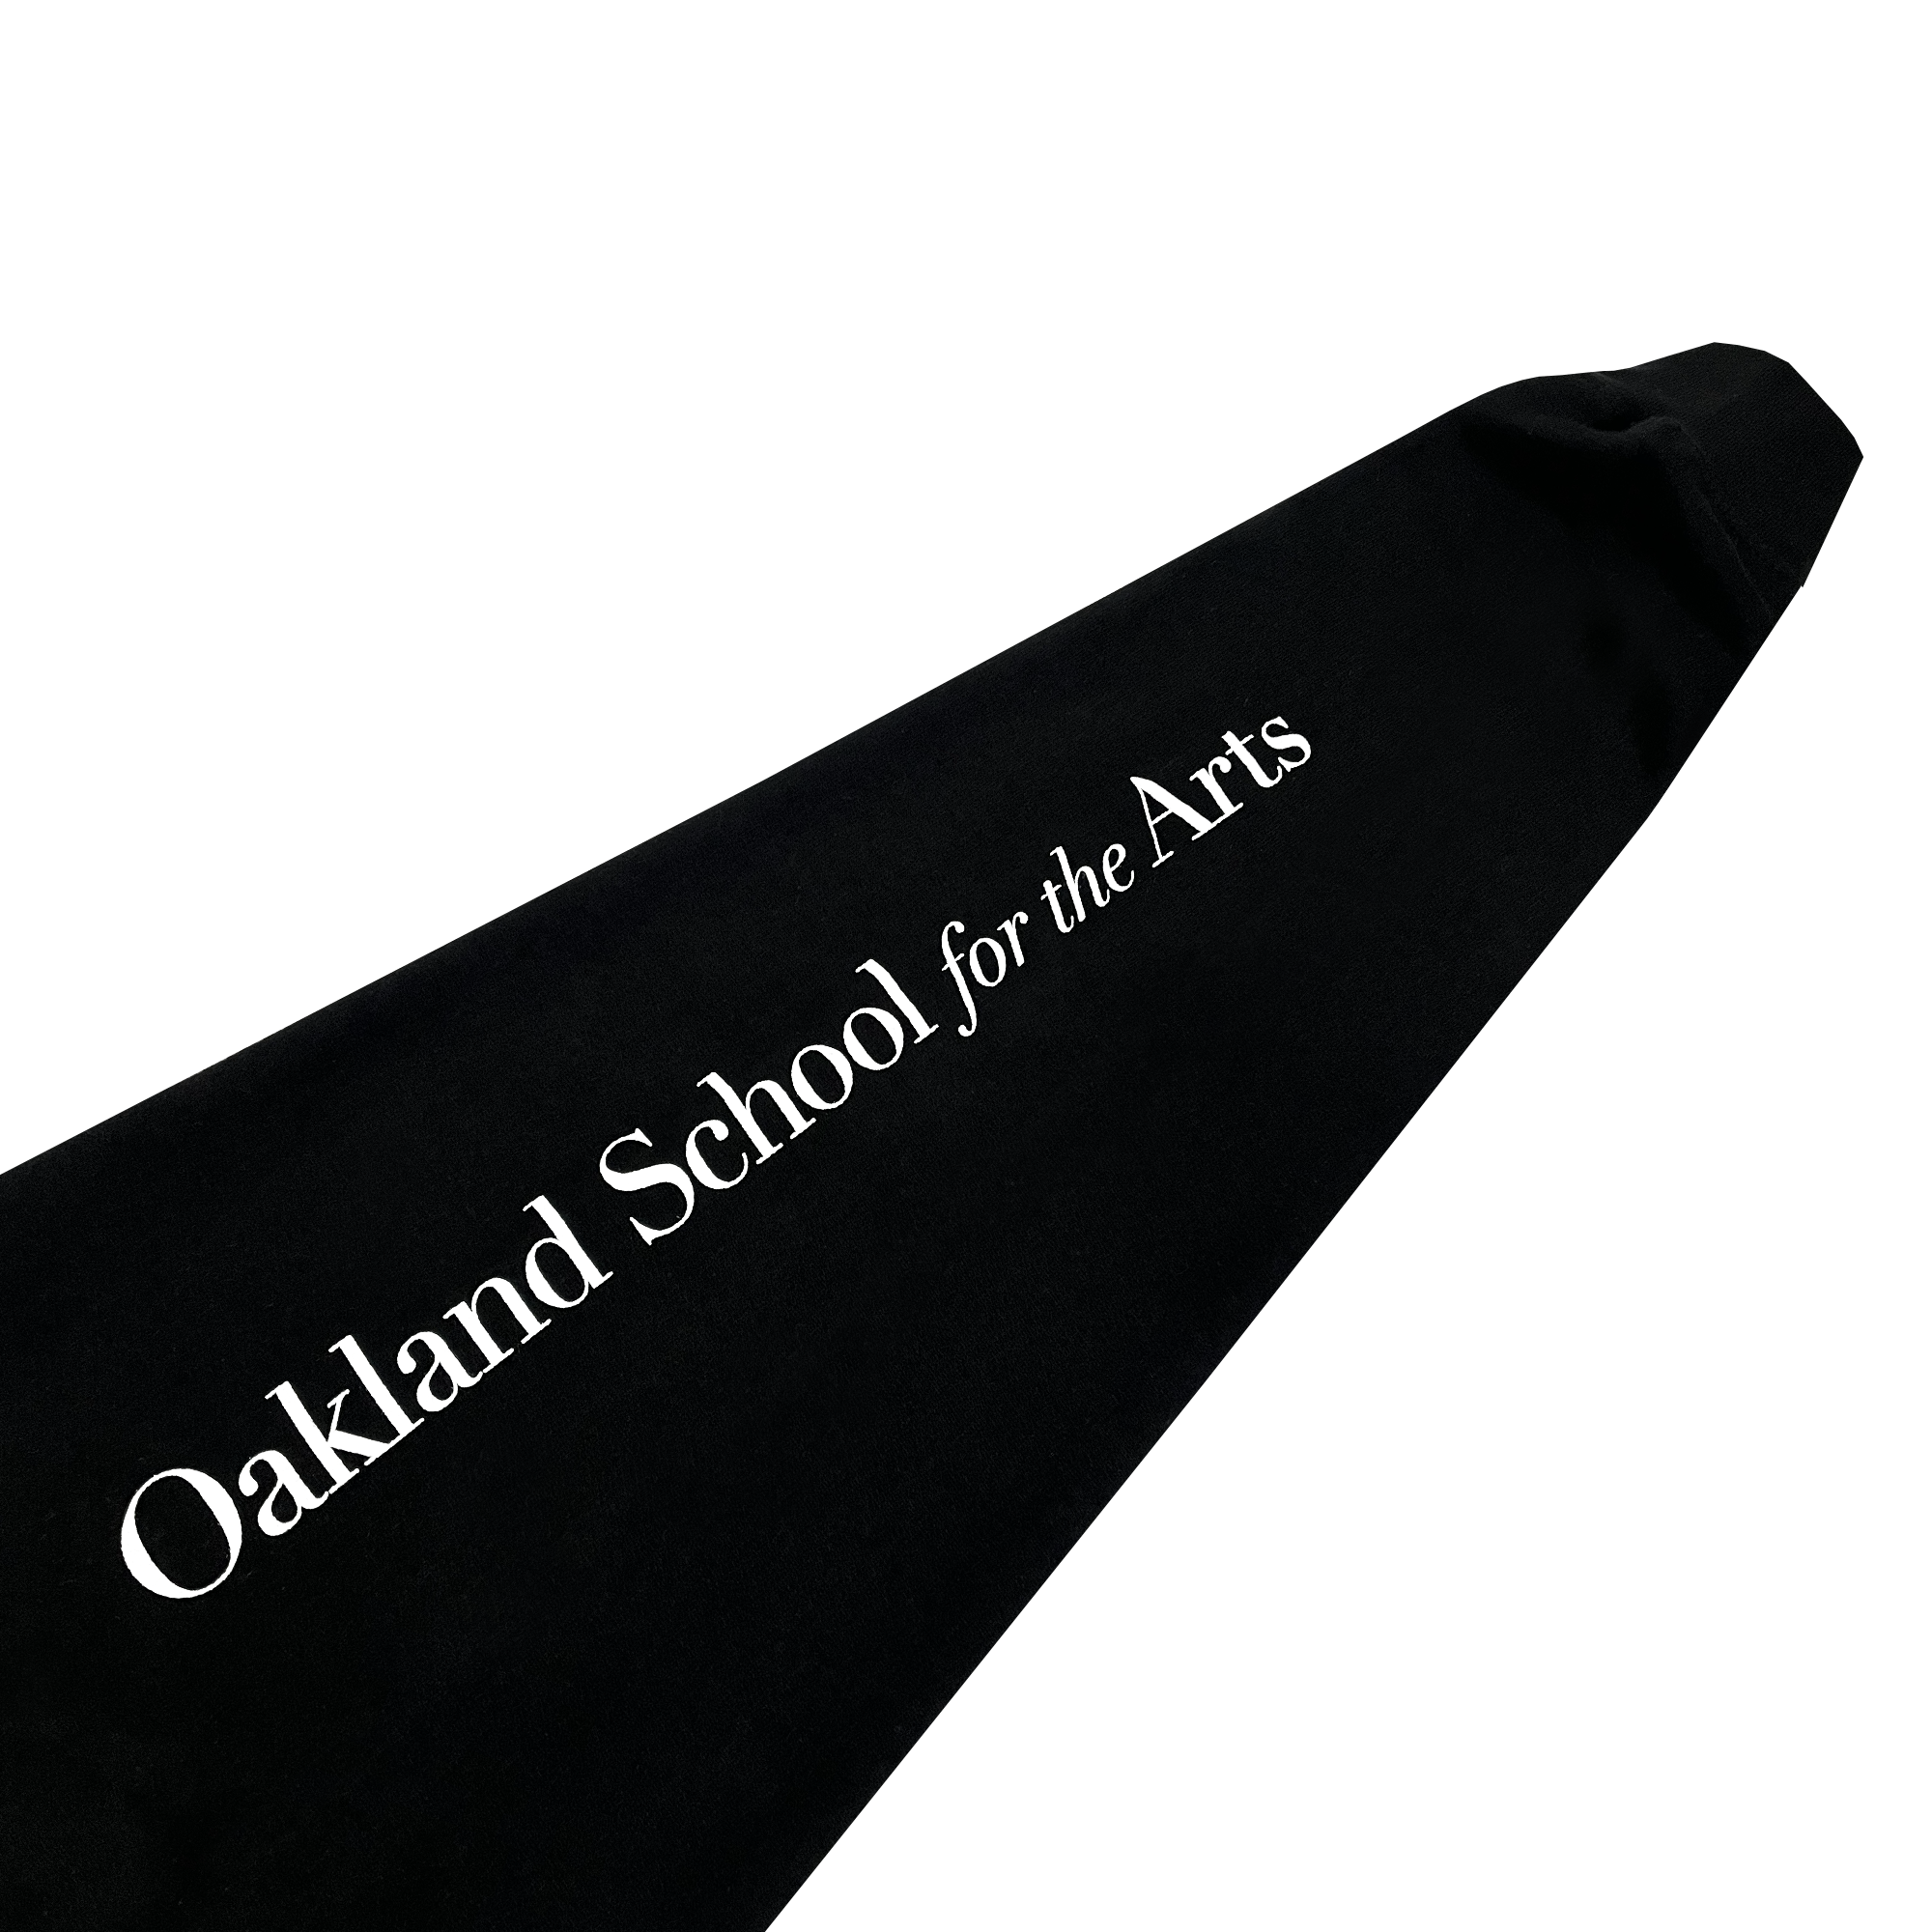 Sleeve of a black sweatshirt with Oakland School for the Arts wordmark in white.